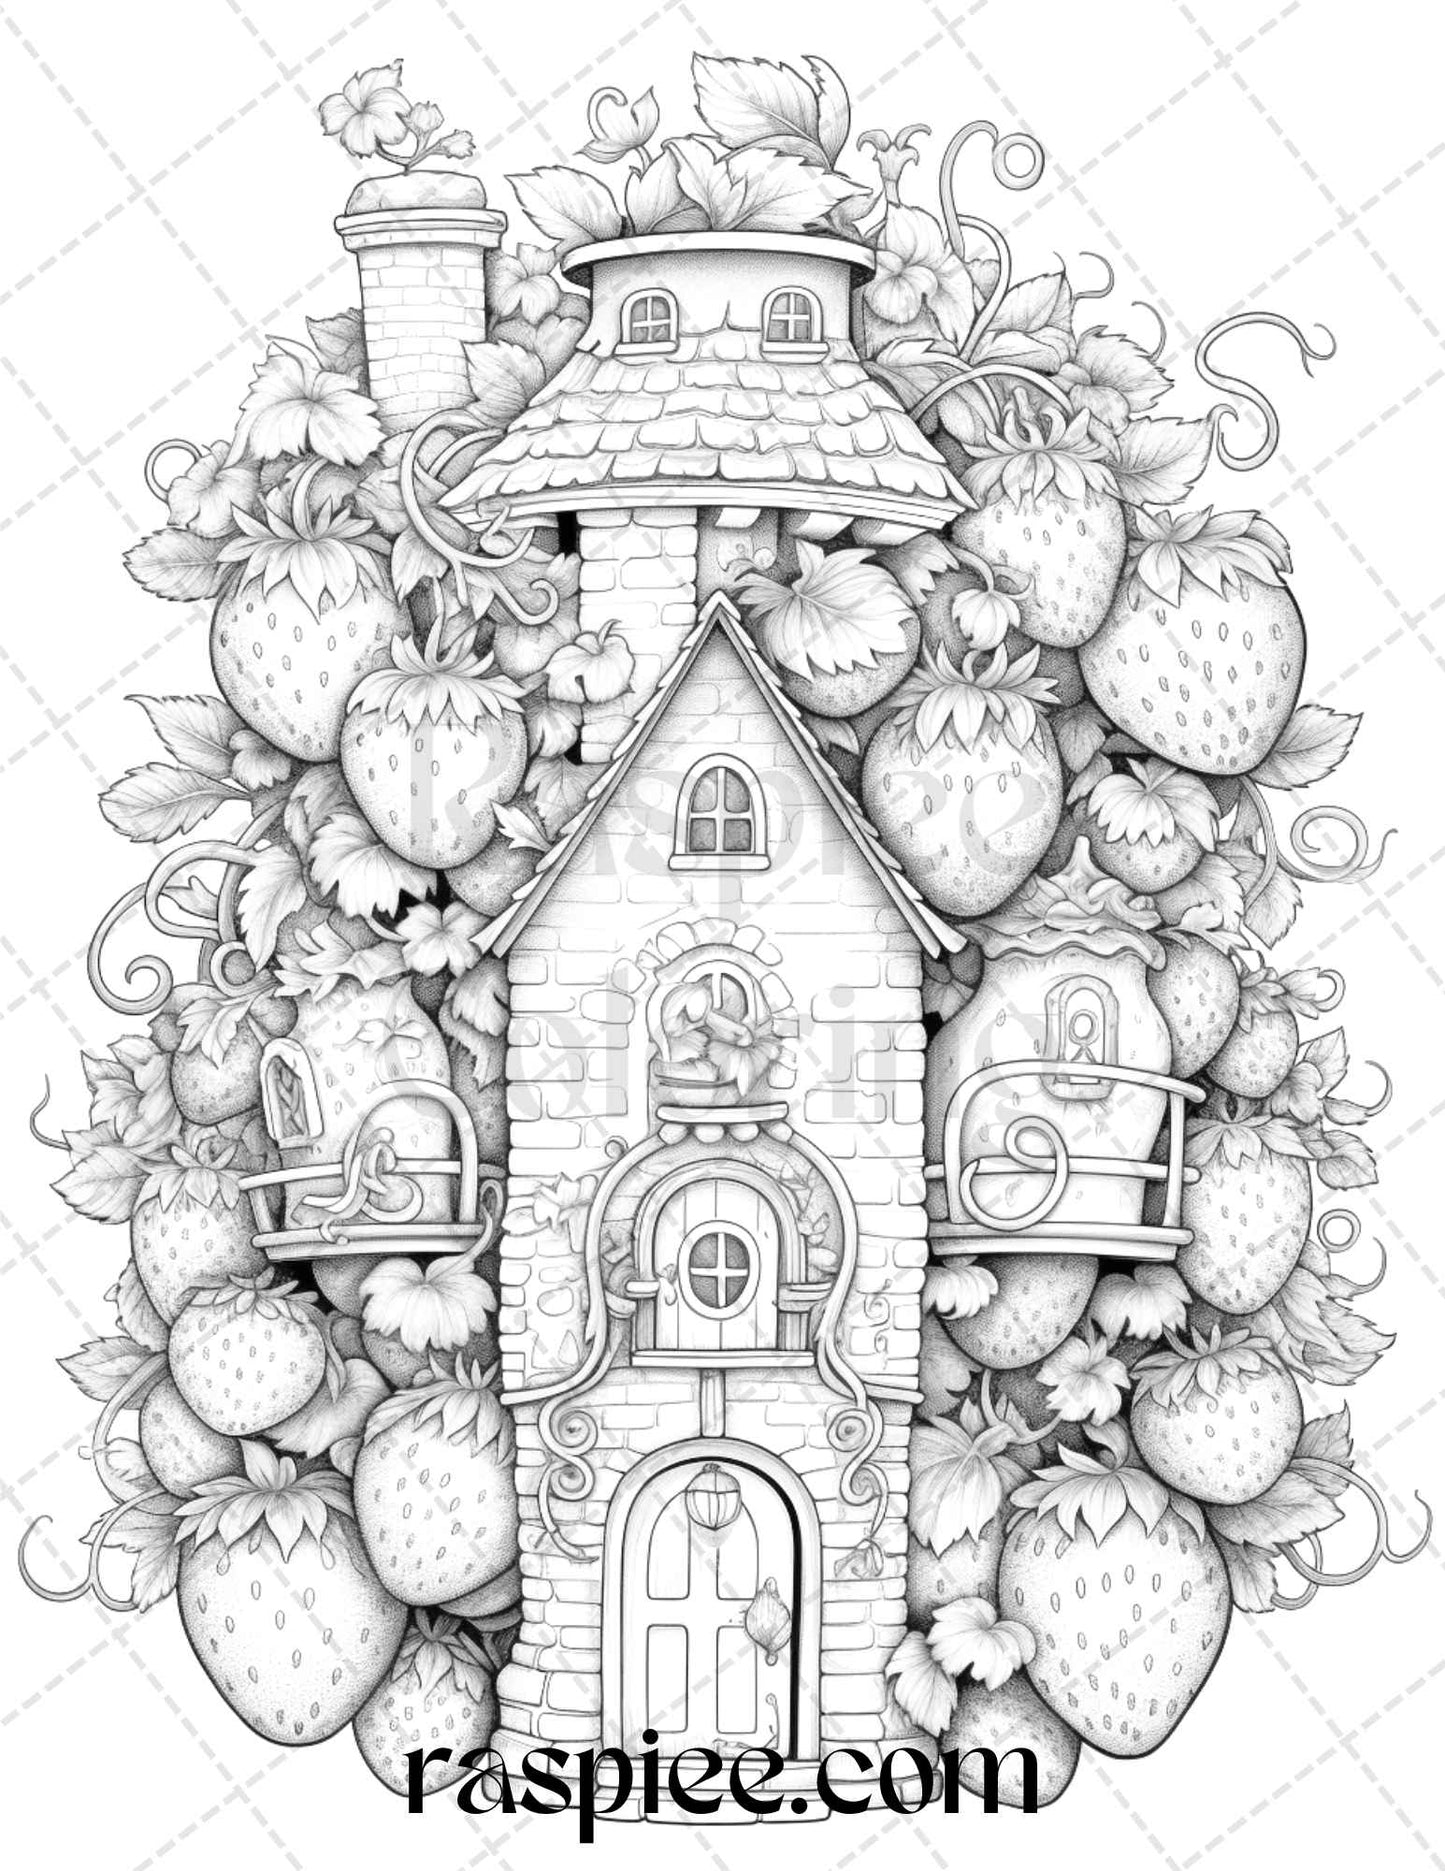 grayscale coloring pages, printable coloring pages, adult coloring pages, kids coloring pages, strawberry houses, grayscale art, coloring book, digital download